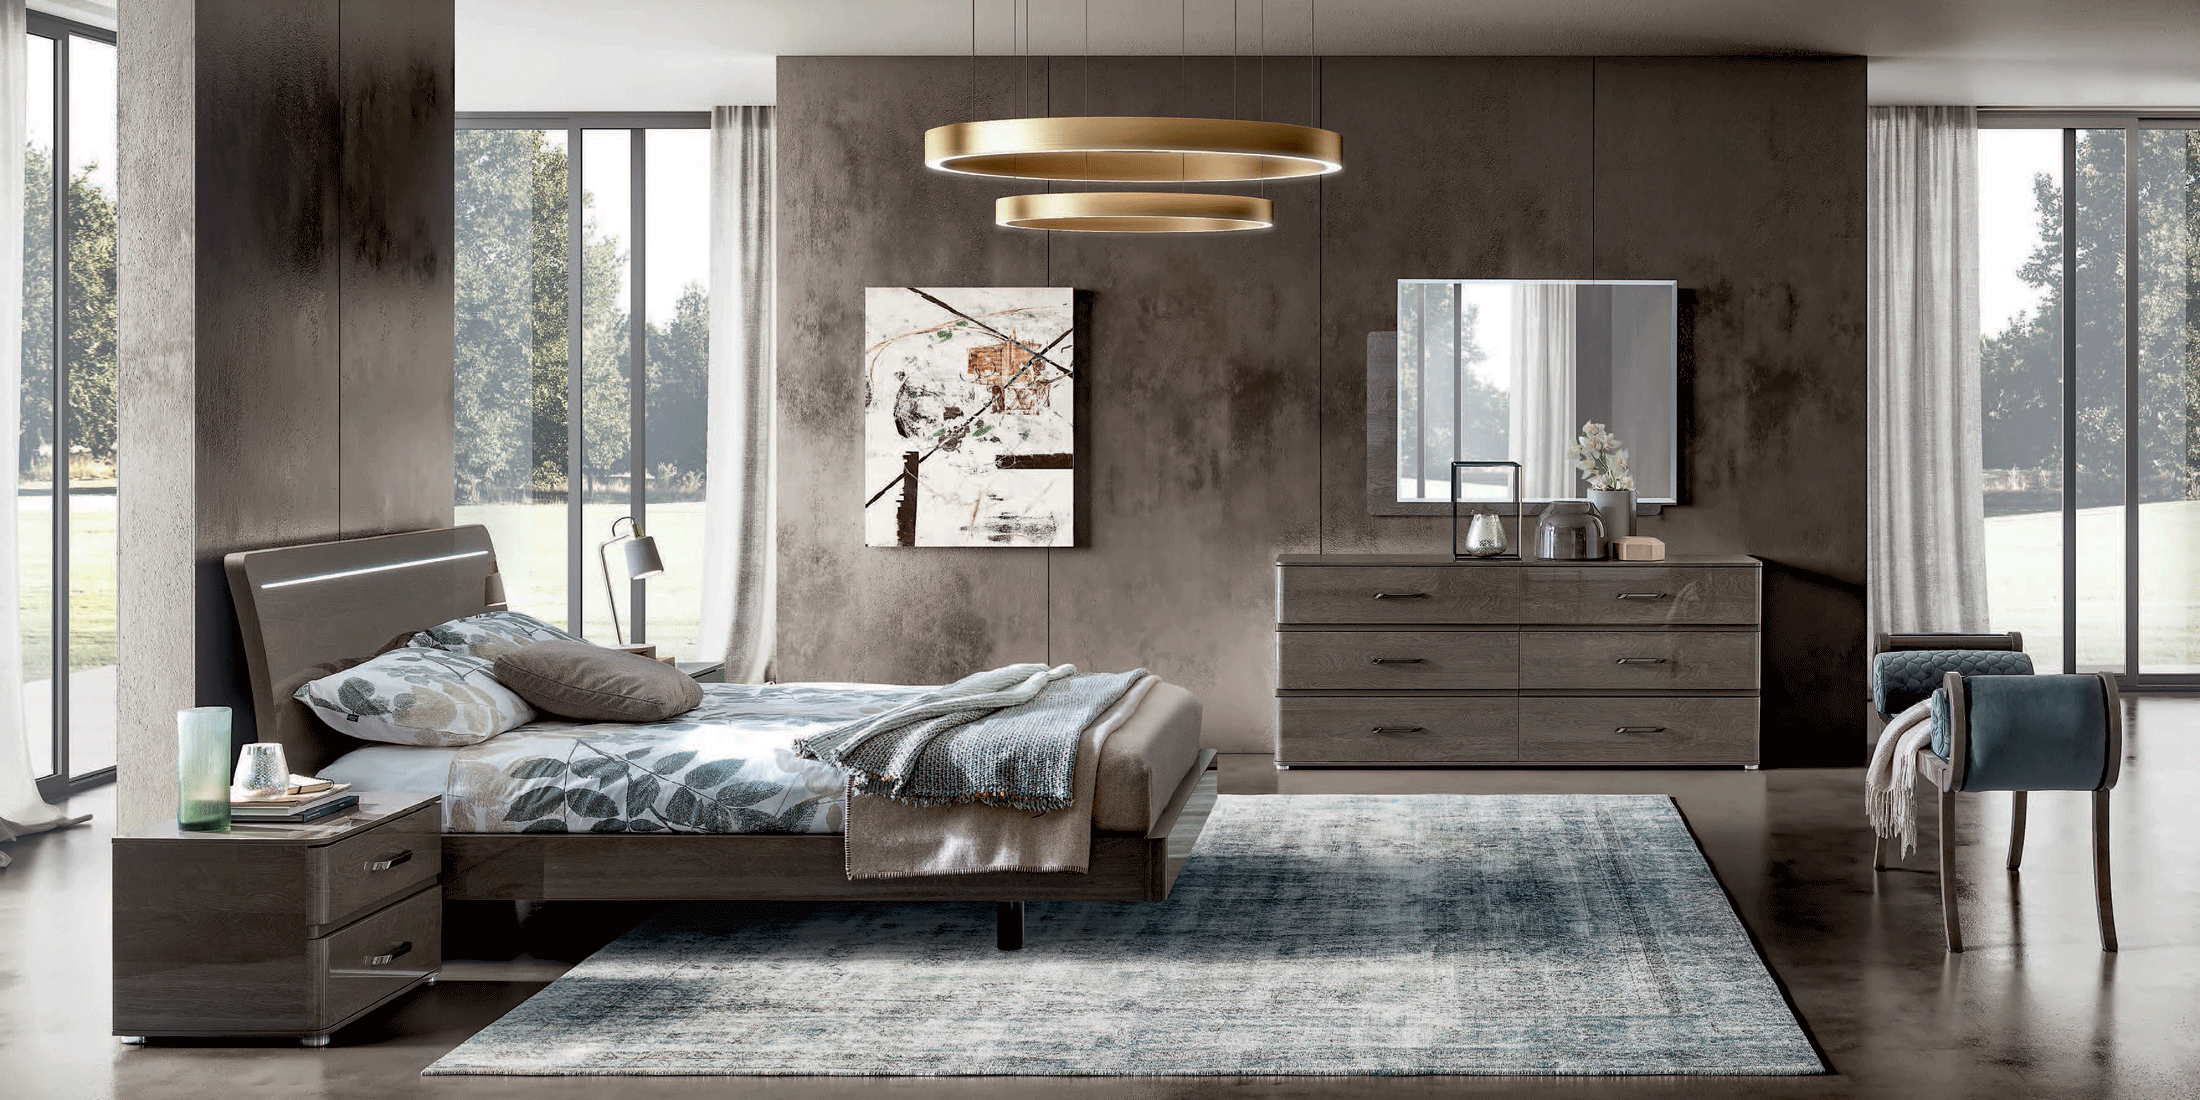 Bedroom Furniture Modern Bedrooms QS and KS Maia Additional Items